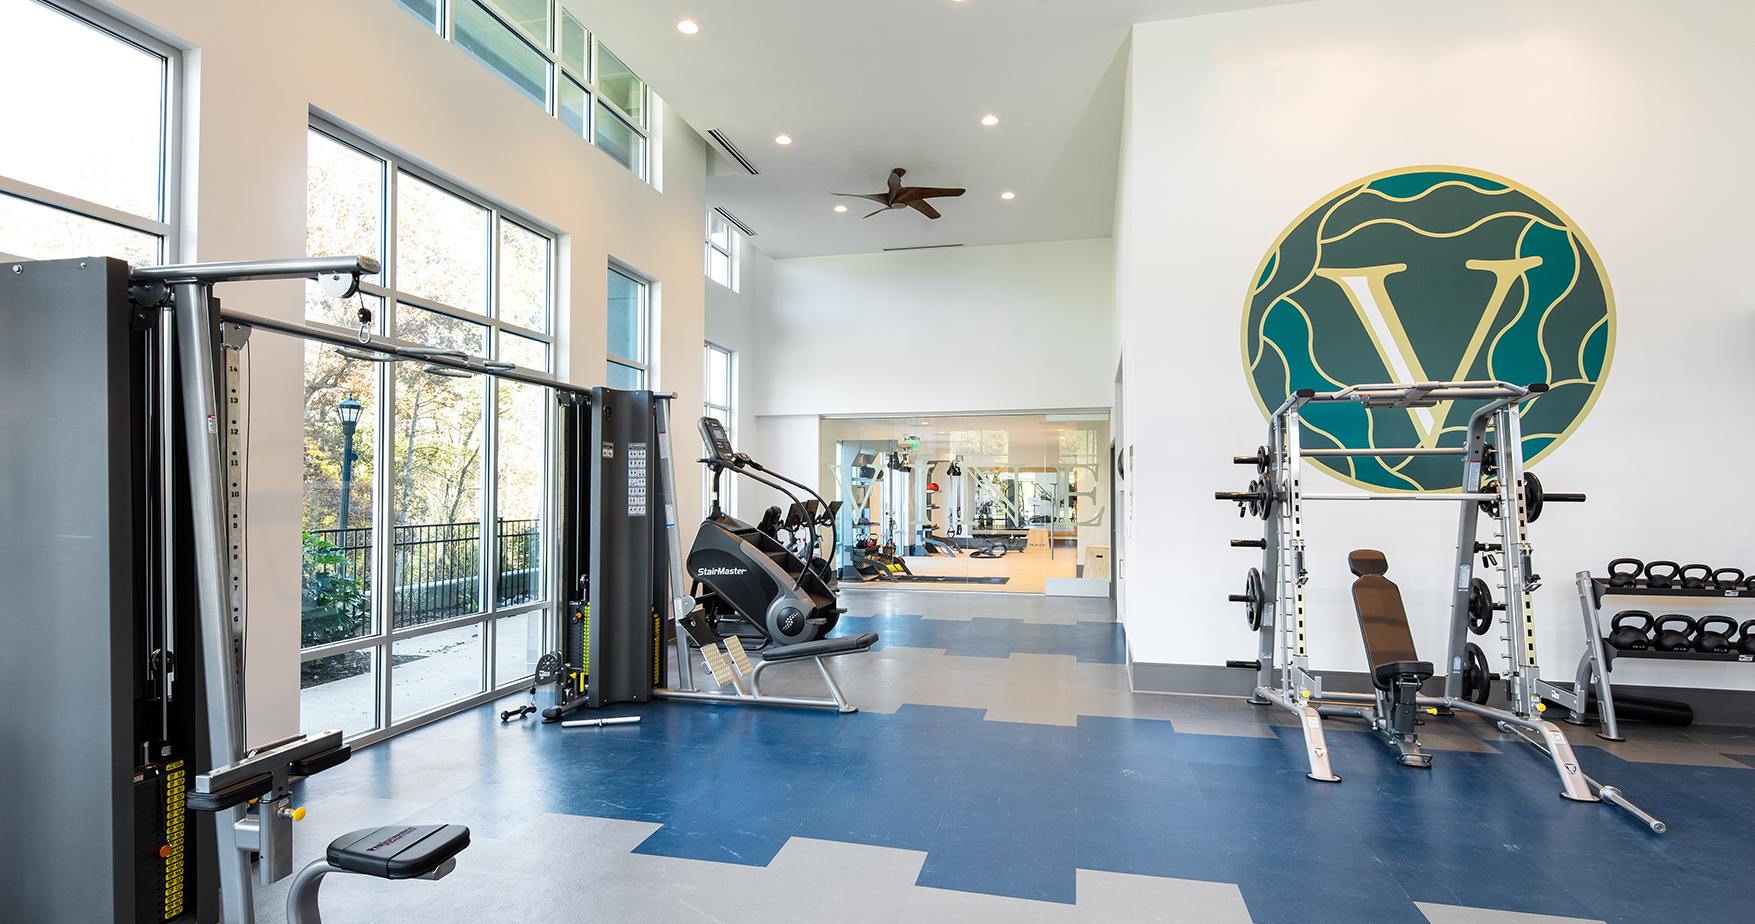 Vine North Hills fitness center with the vine logo on the wall and the stairmaster and smith machine